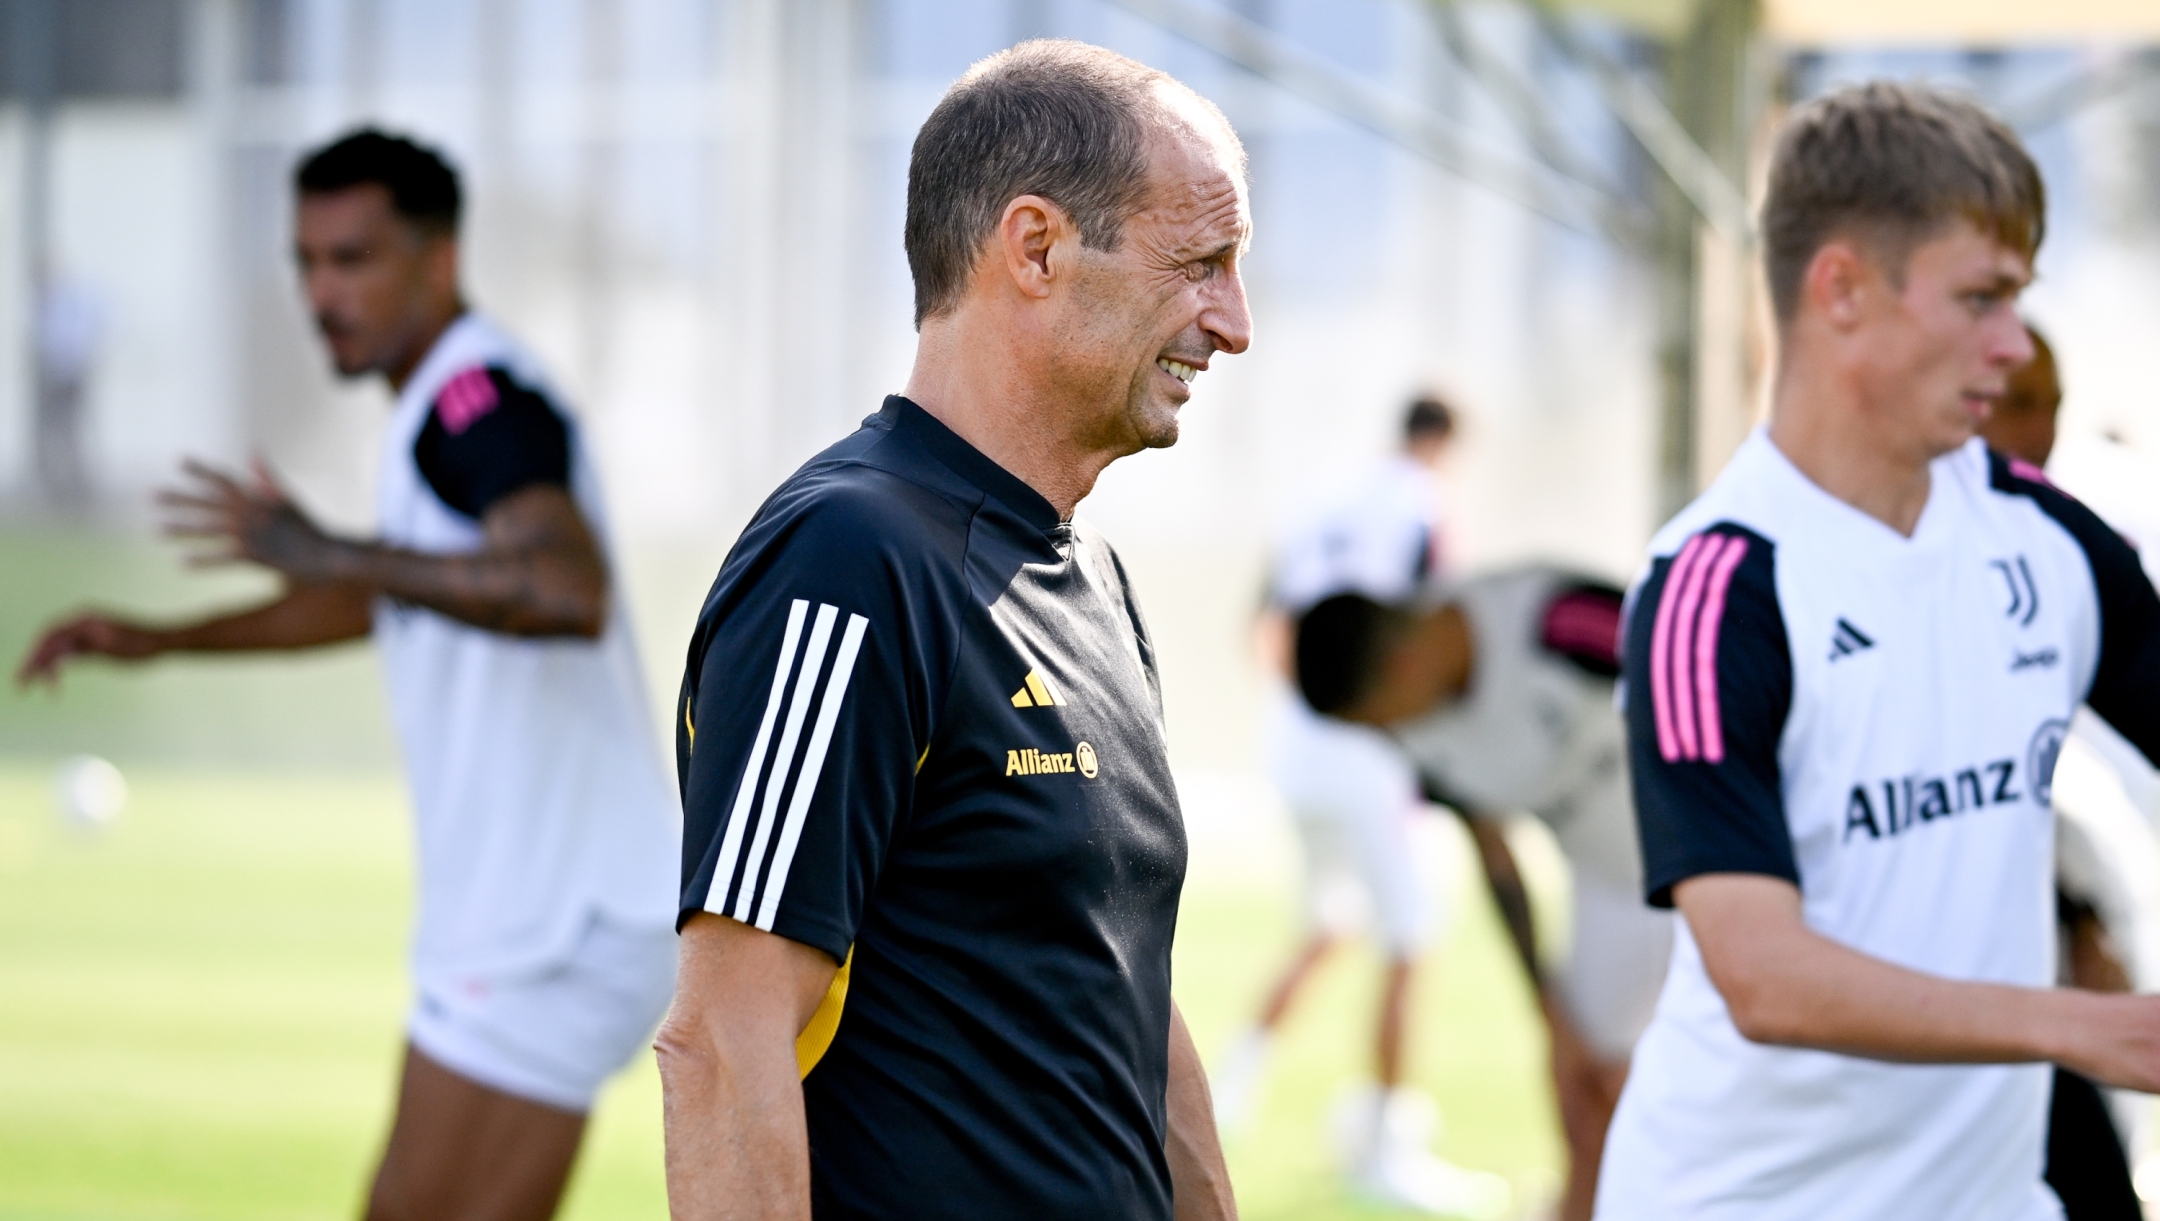 TURIN, ITALY - JULY 17: Massimiliano Allegri of Juventus during a training session at JTC on July 17, 2023 in Turin, Italy. (Photo by Daniele Badolato - Juventus FC/Juventus FC via Getty Images)